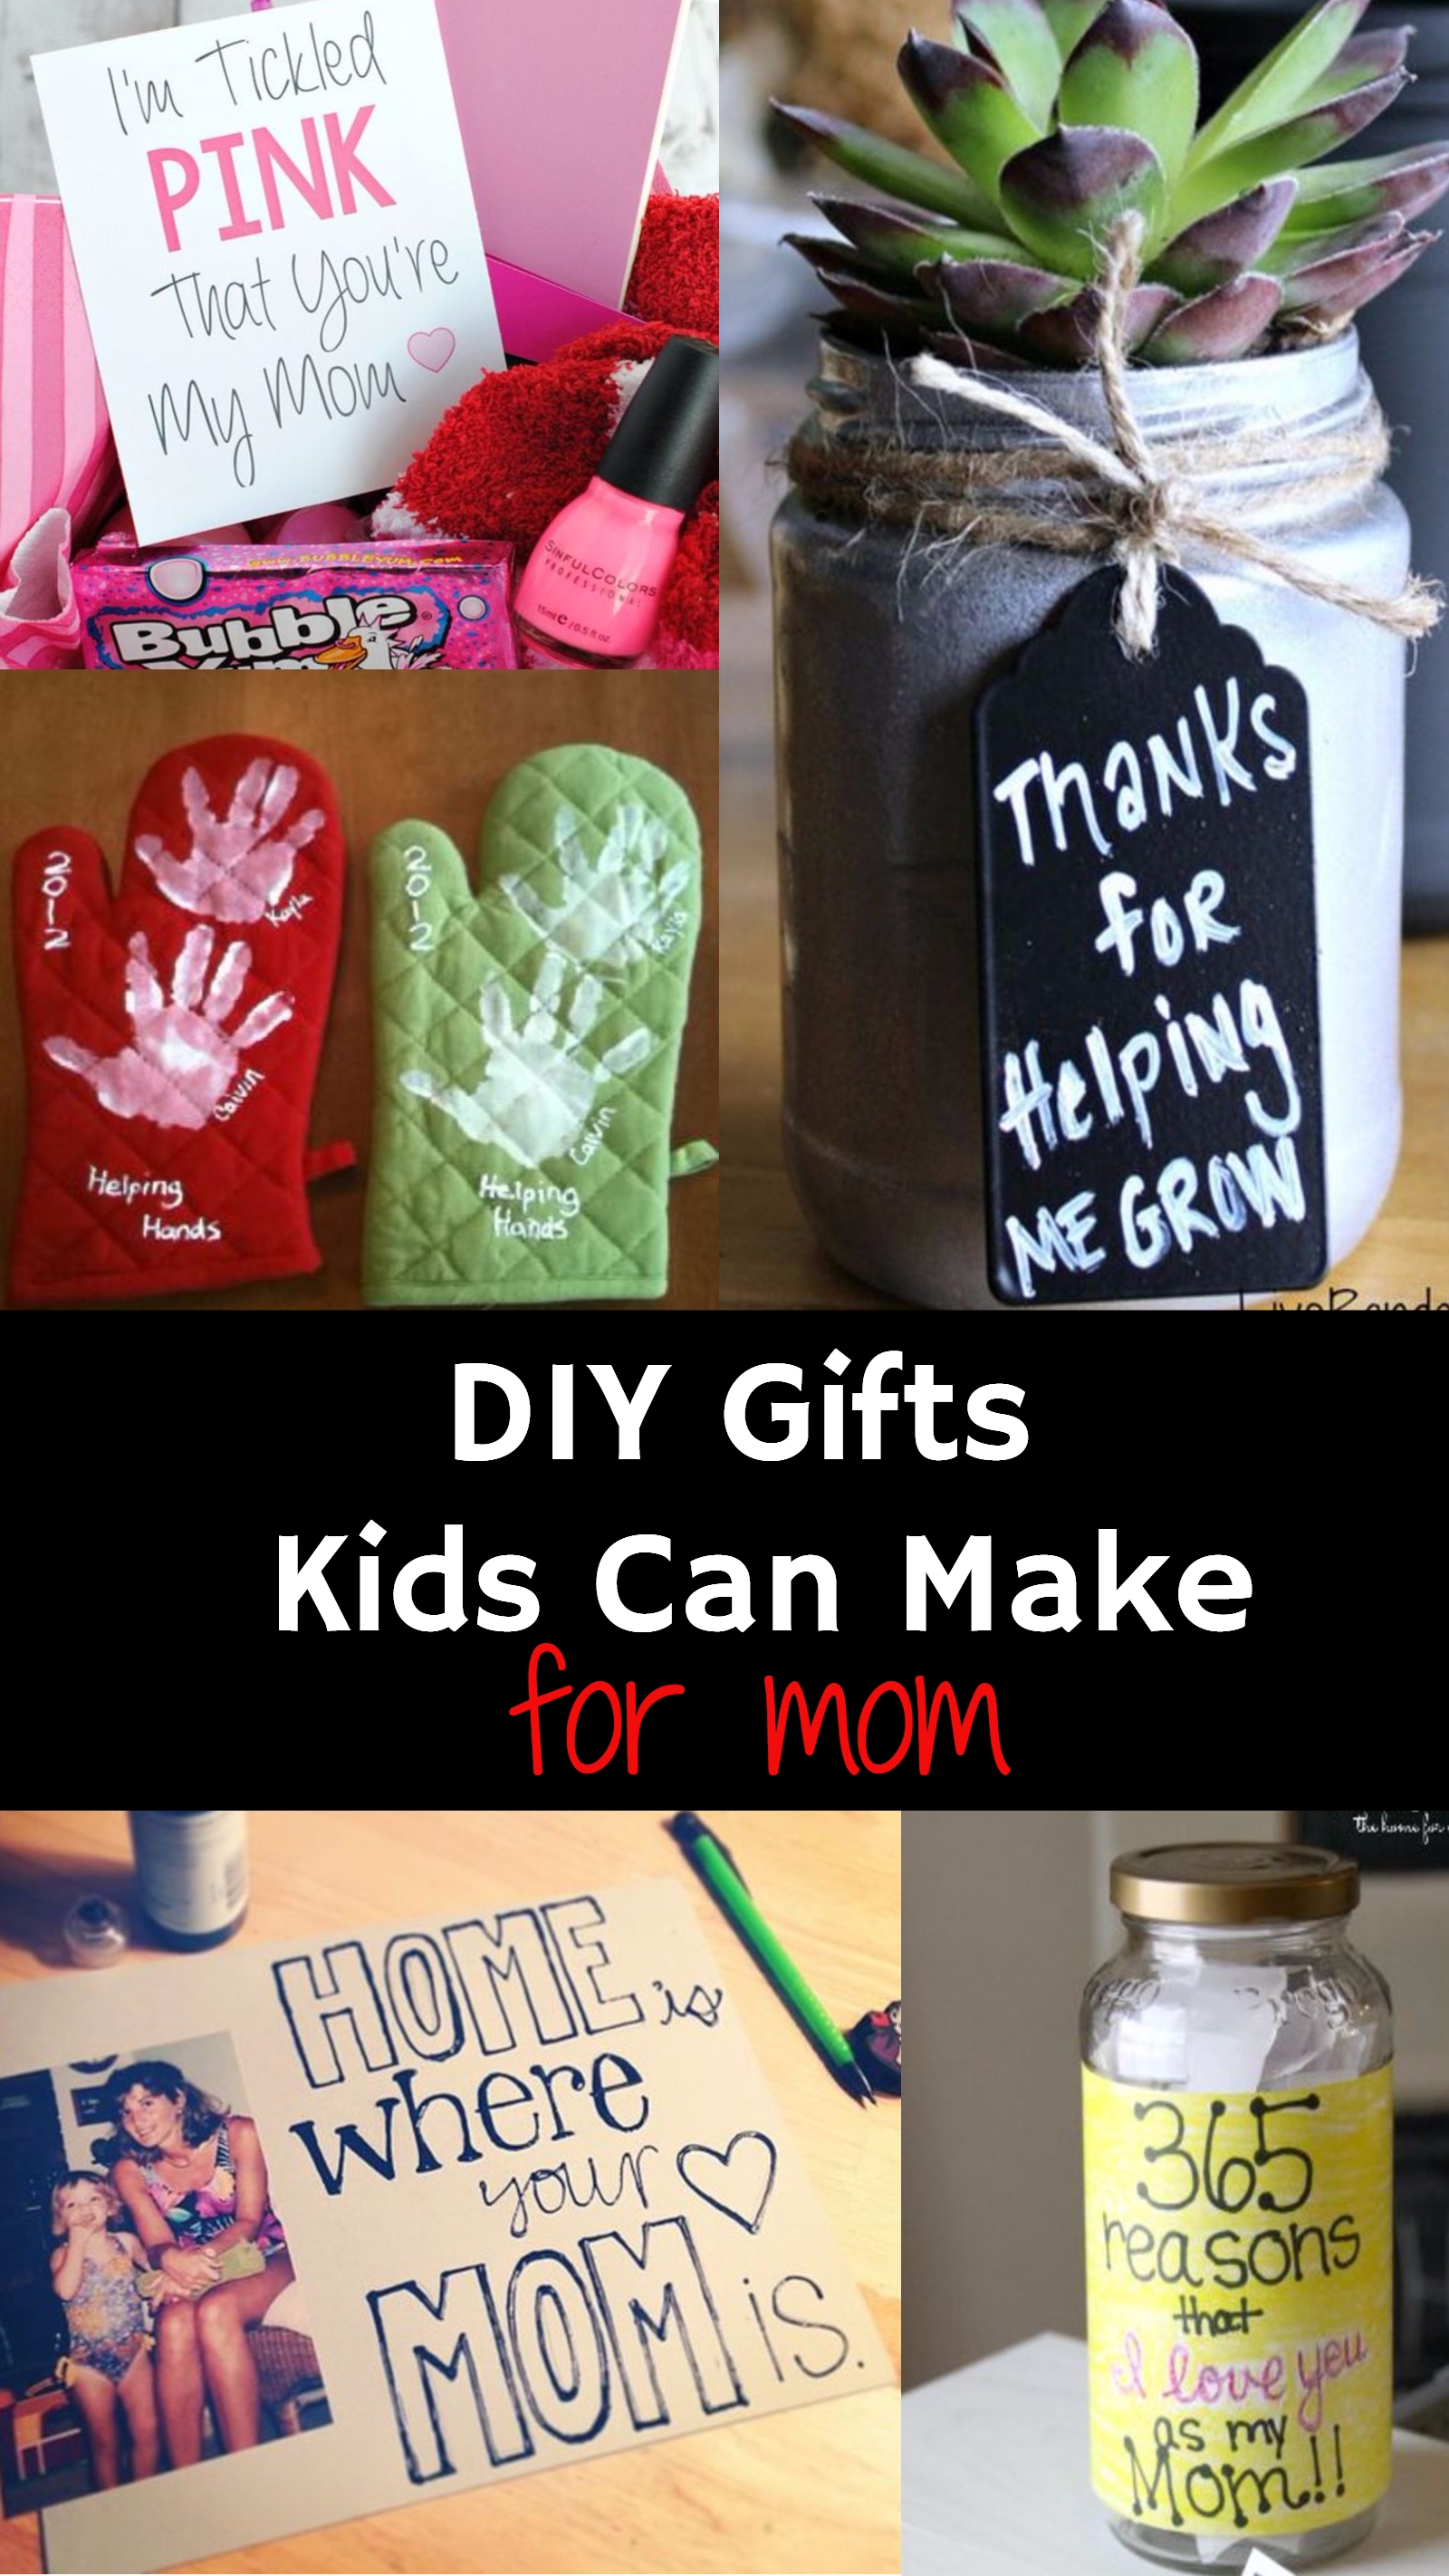 10 Beautiful Creative Gift Ideas For Mom diy gifts for mom from kids grandmothers aunt and birthday gifts 1 2023